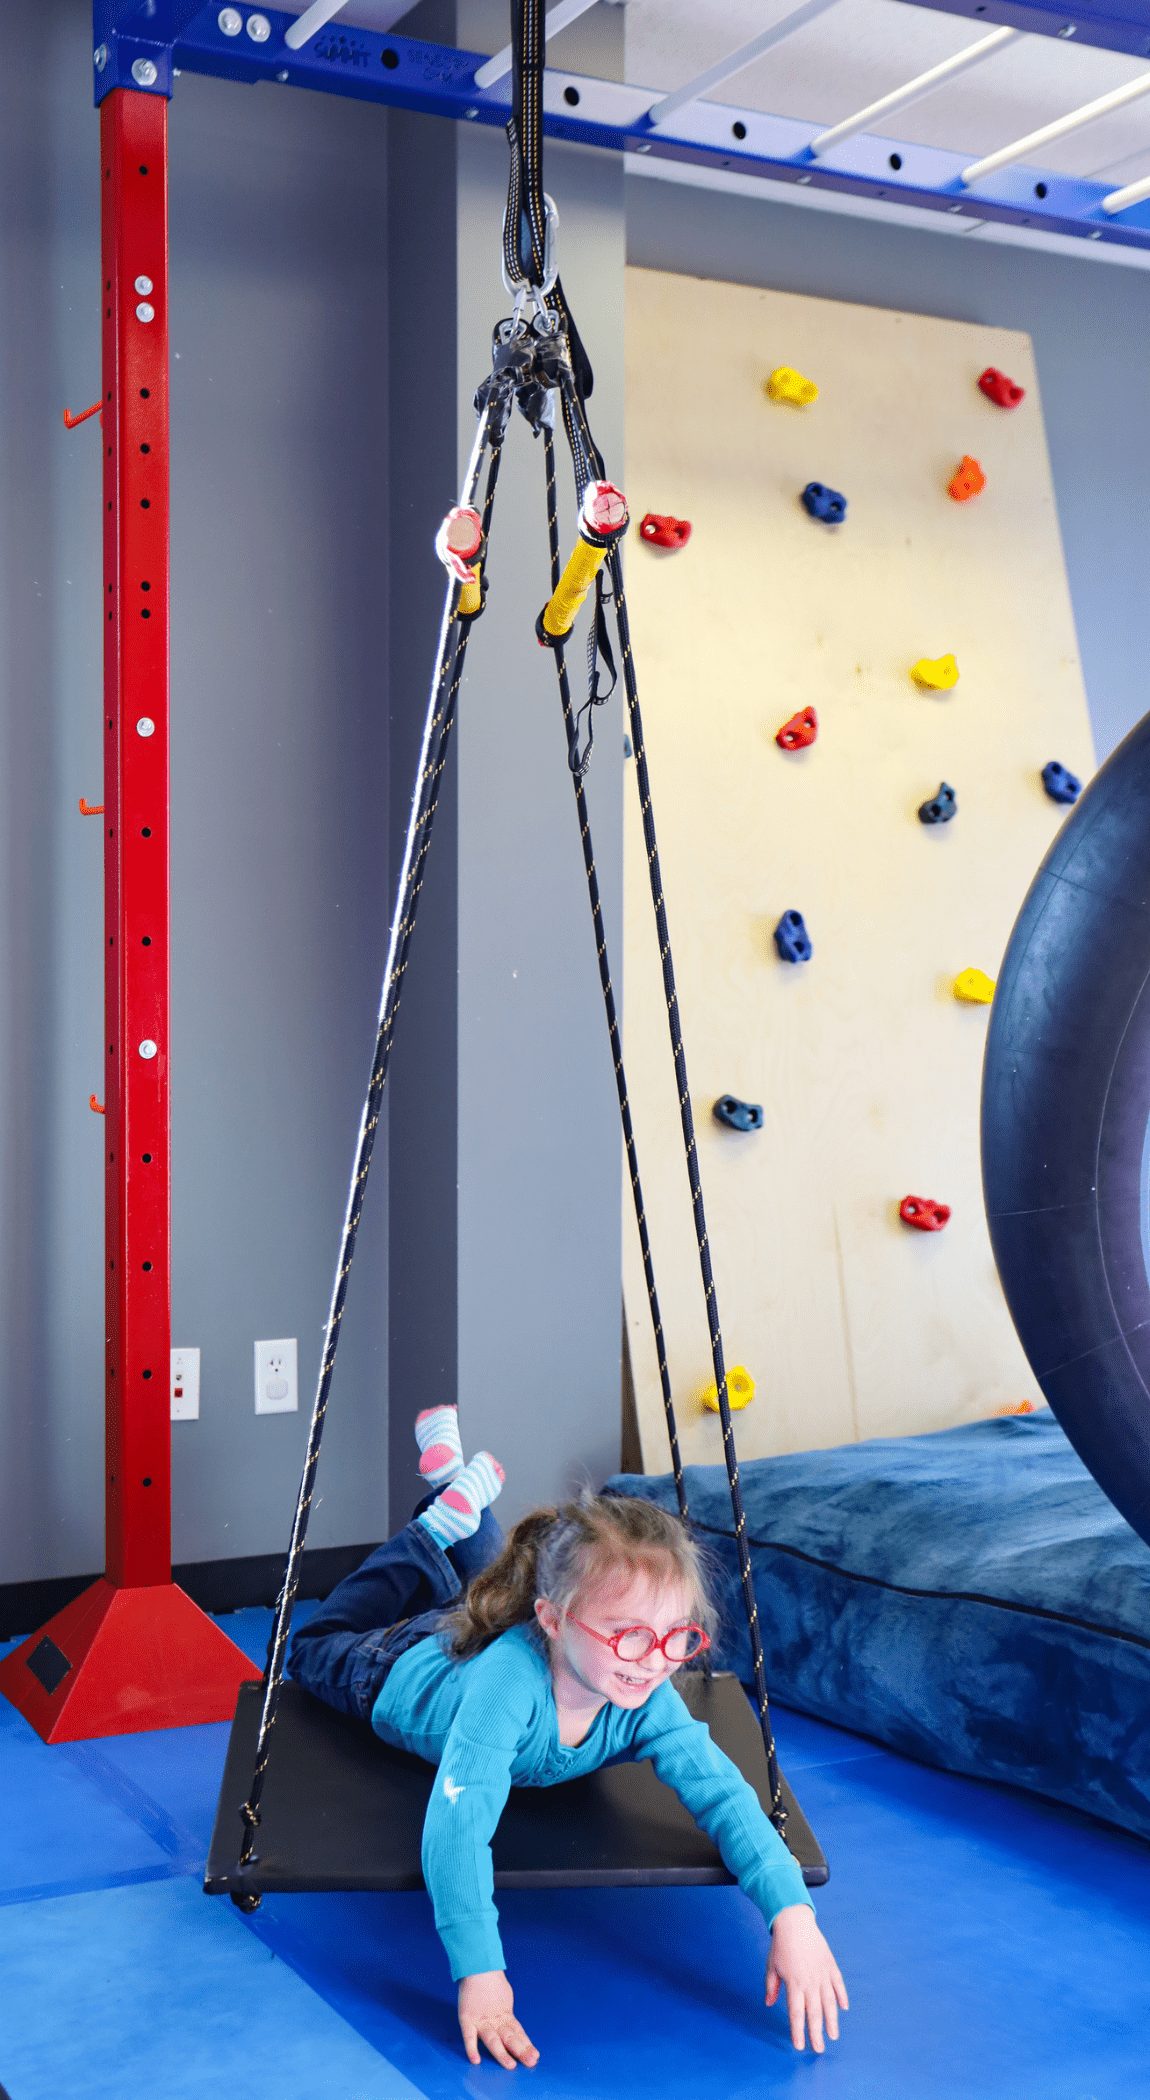 State-of-the-art freestanding sensory gym designed to be used in a commercial setting. Summit Sensory Gym works with some of the largest organizations in the world that provide pediatric therapy services. Our clients include; hospitals, schools, ABA clinics, pediatric therapy clinics, recreation centers, stadiums, non-profits, and so many more. Learn more about our sensory gyms at www.summitsensory.com